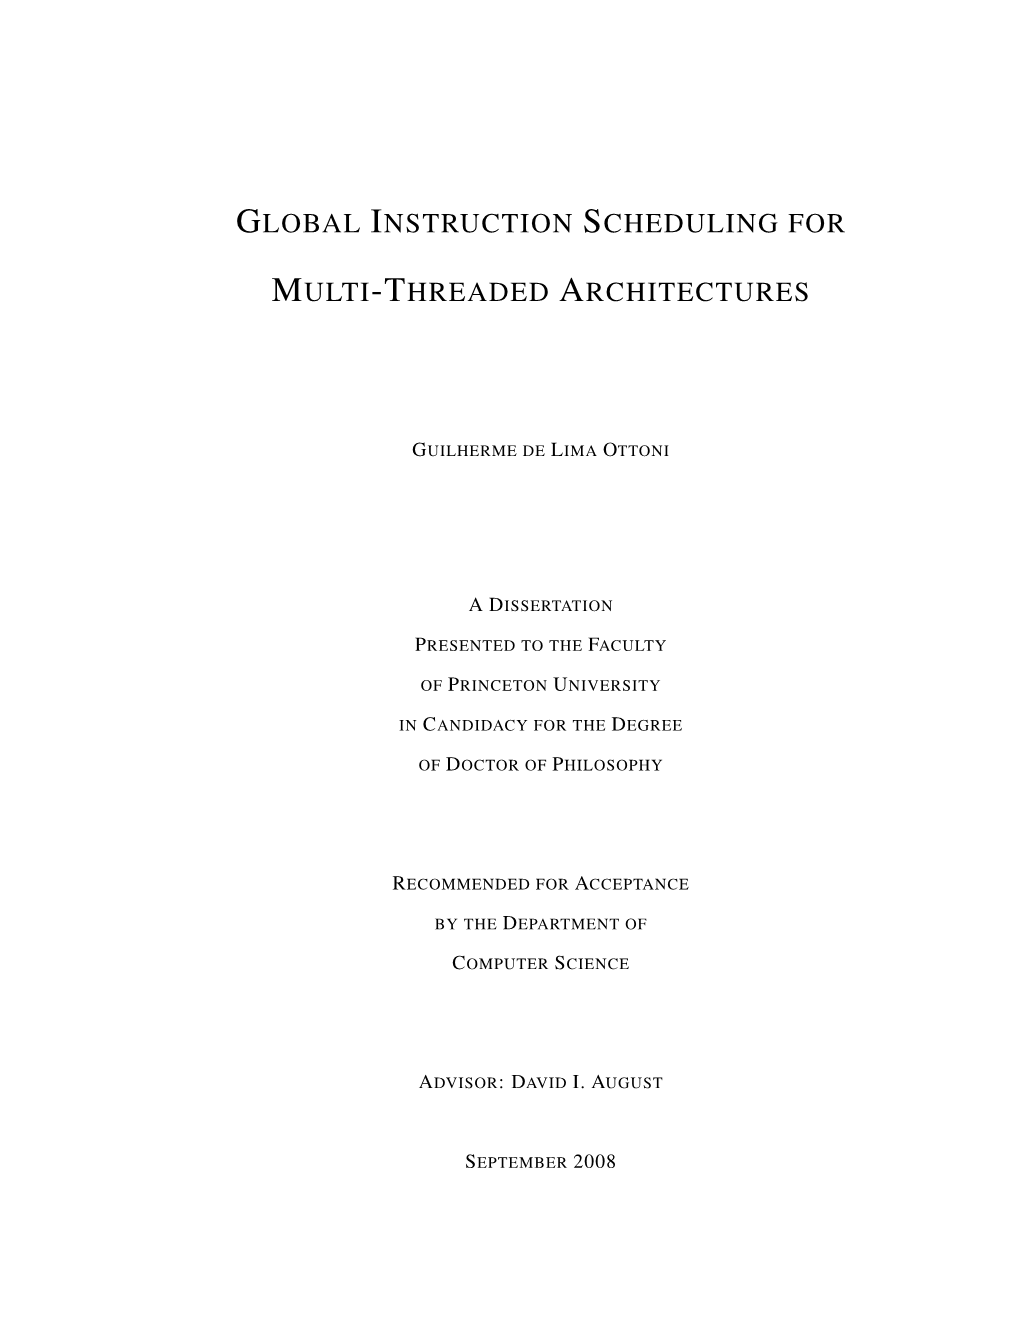 Global Instruction Scheduling for Multi-Threaded Architectures [72, 74, 76]